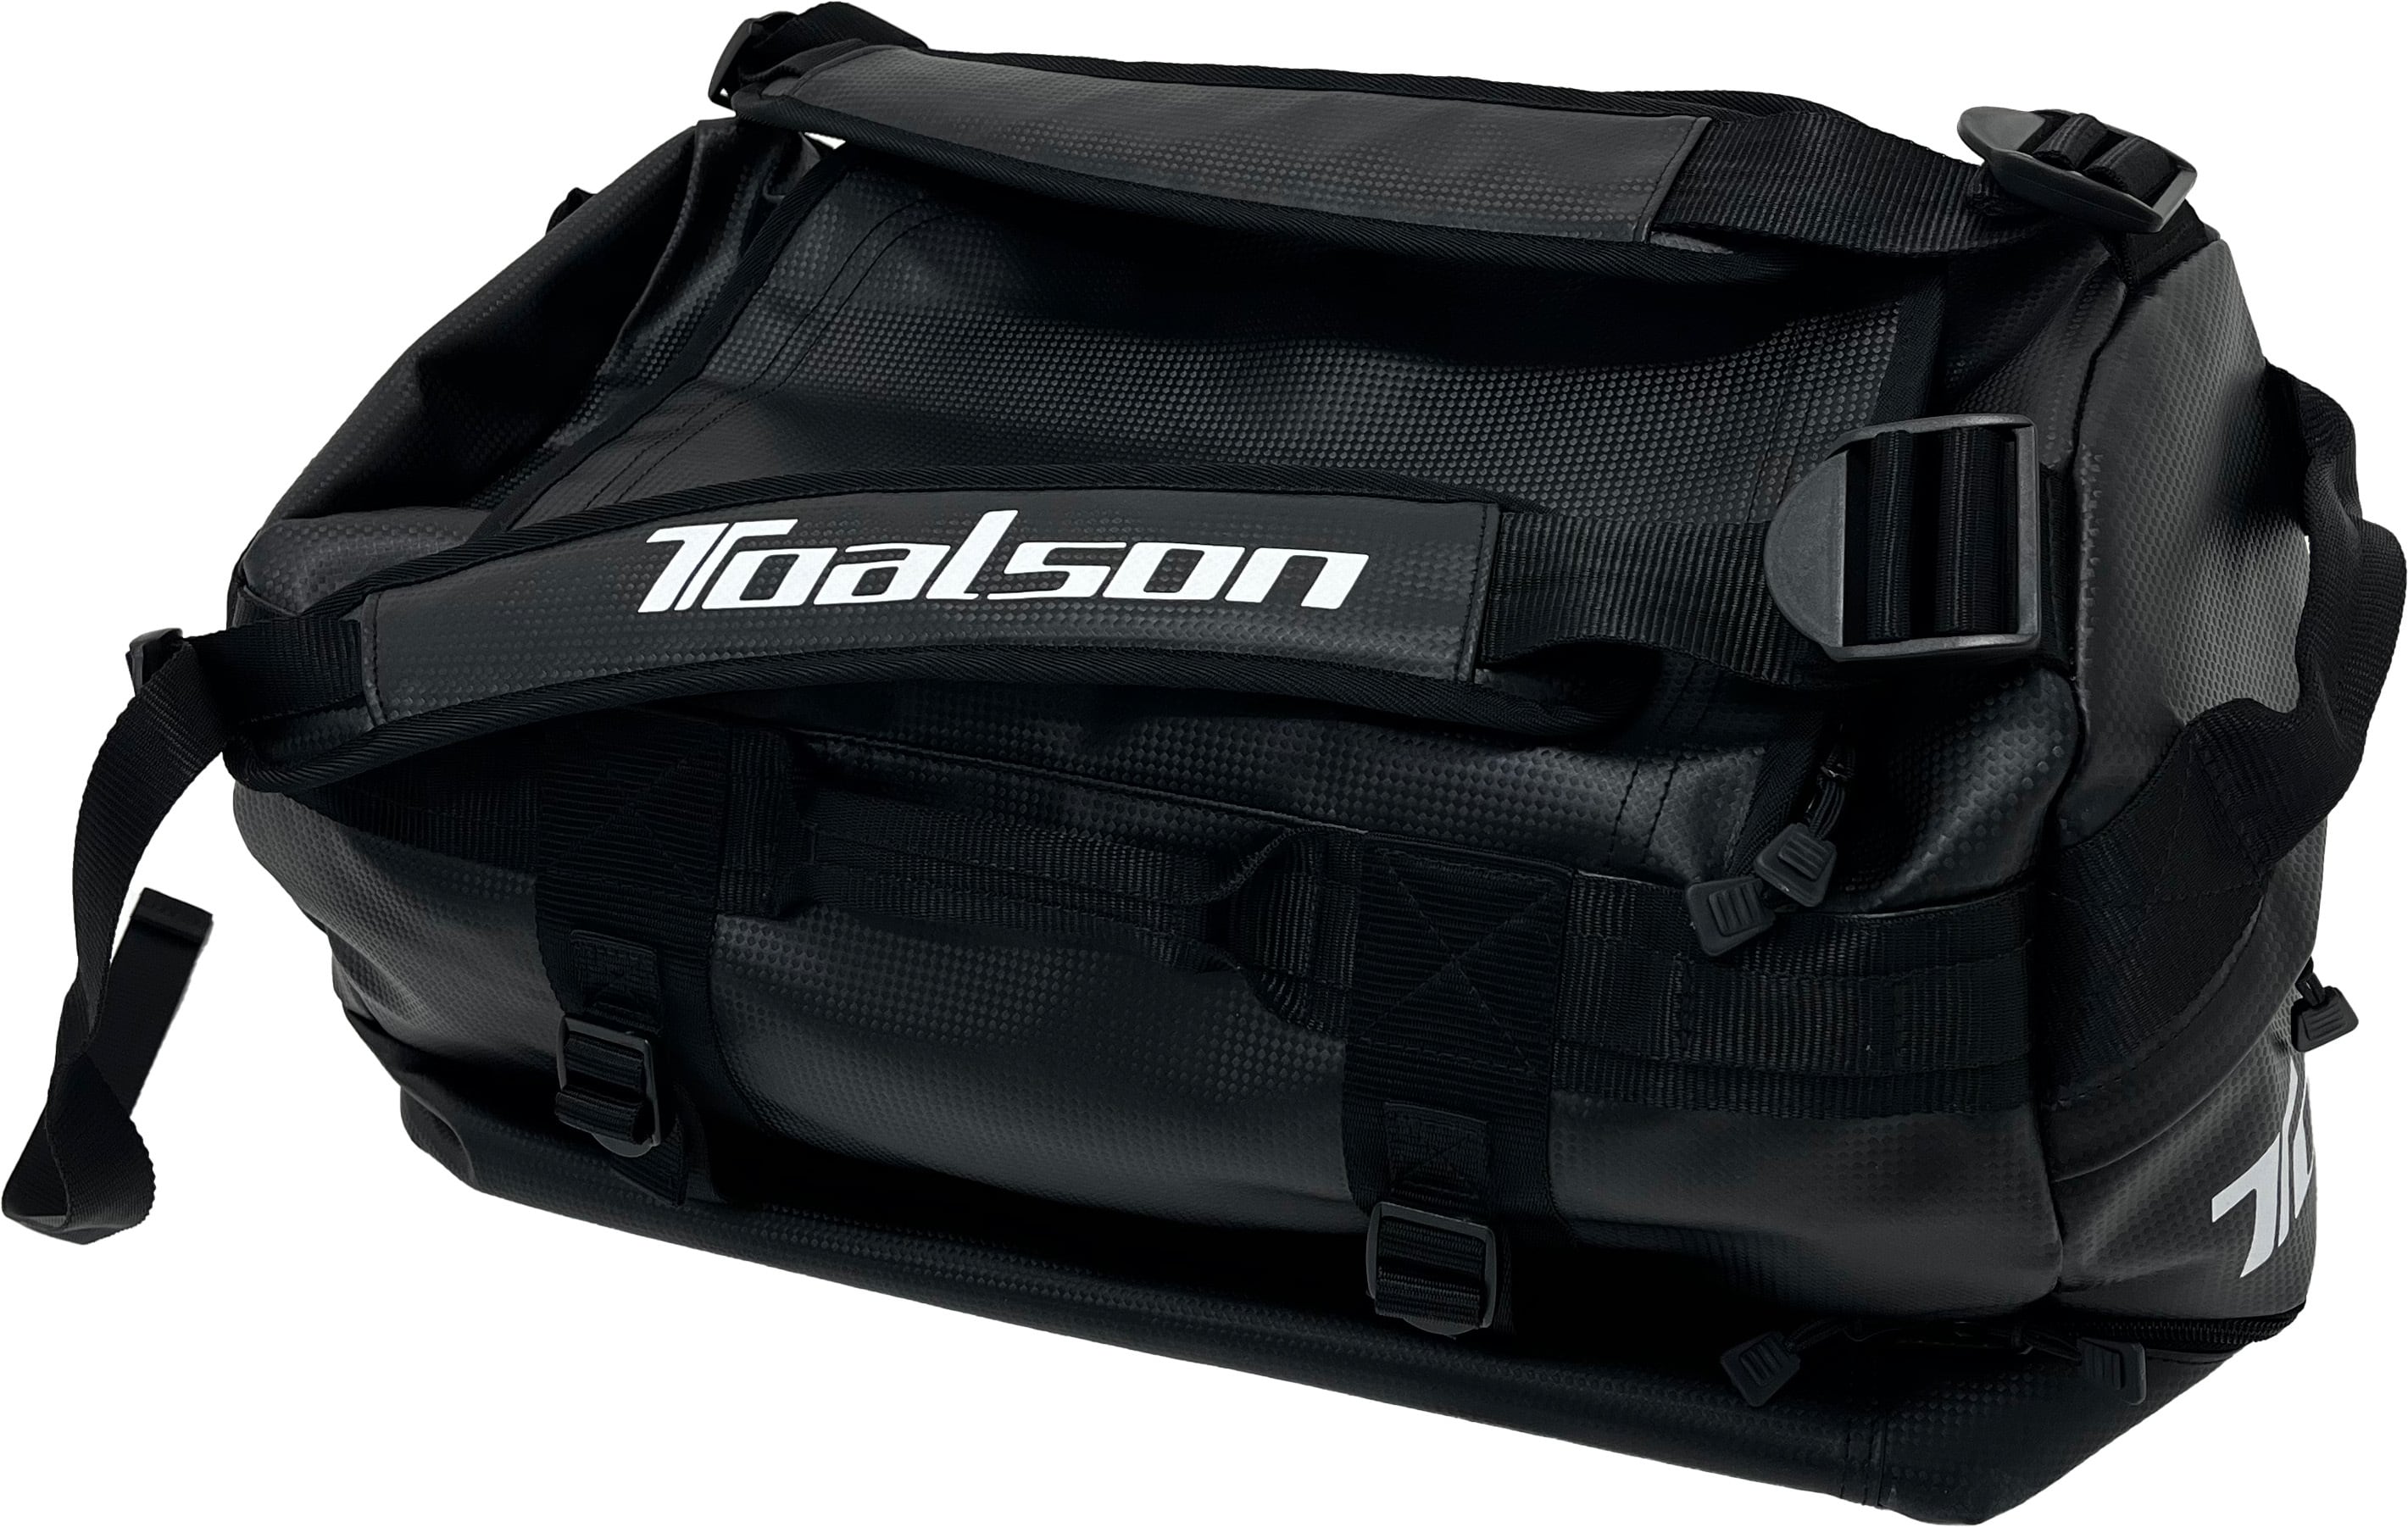 【VSERIES】トアルソン2WAYダッフルバッグ【1FT2304】/トアルソン TOALSON | トアルソン/Toalson OFFICIAL  ONLINE SITE (ローチェ/roche)